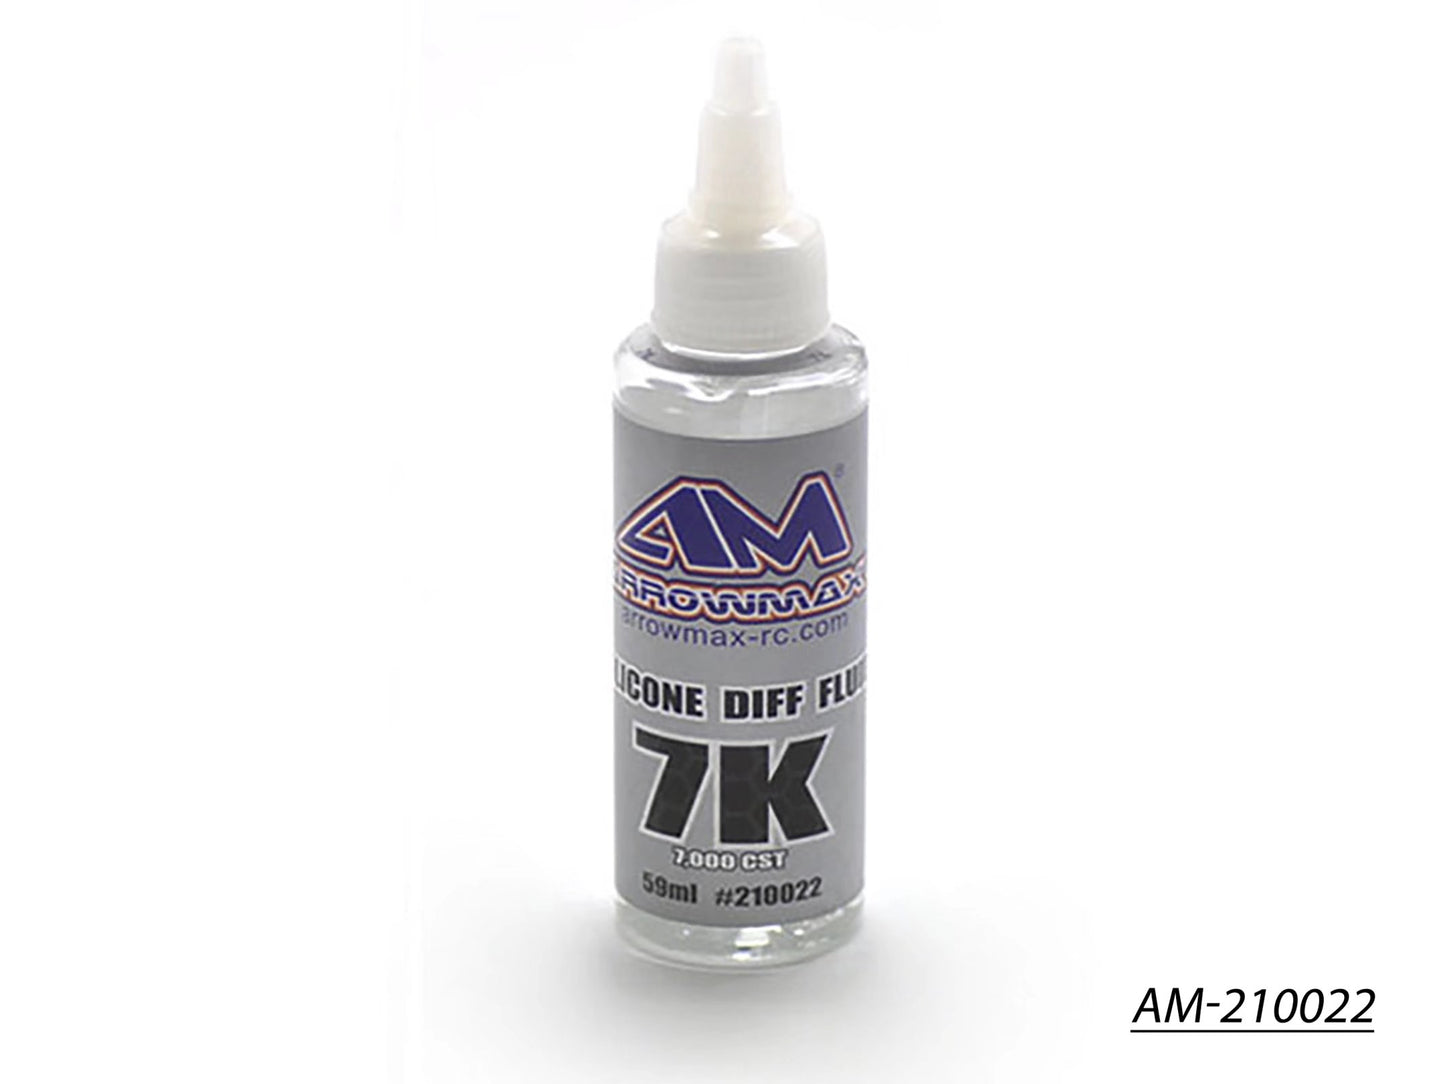 Silicone Diff Fluid 59ml 7.000cst (AM-210022)